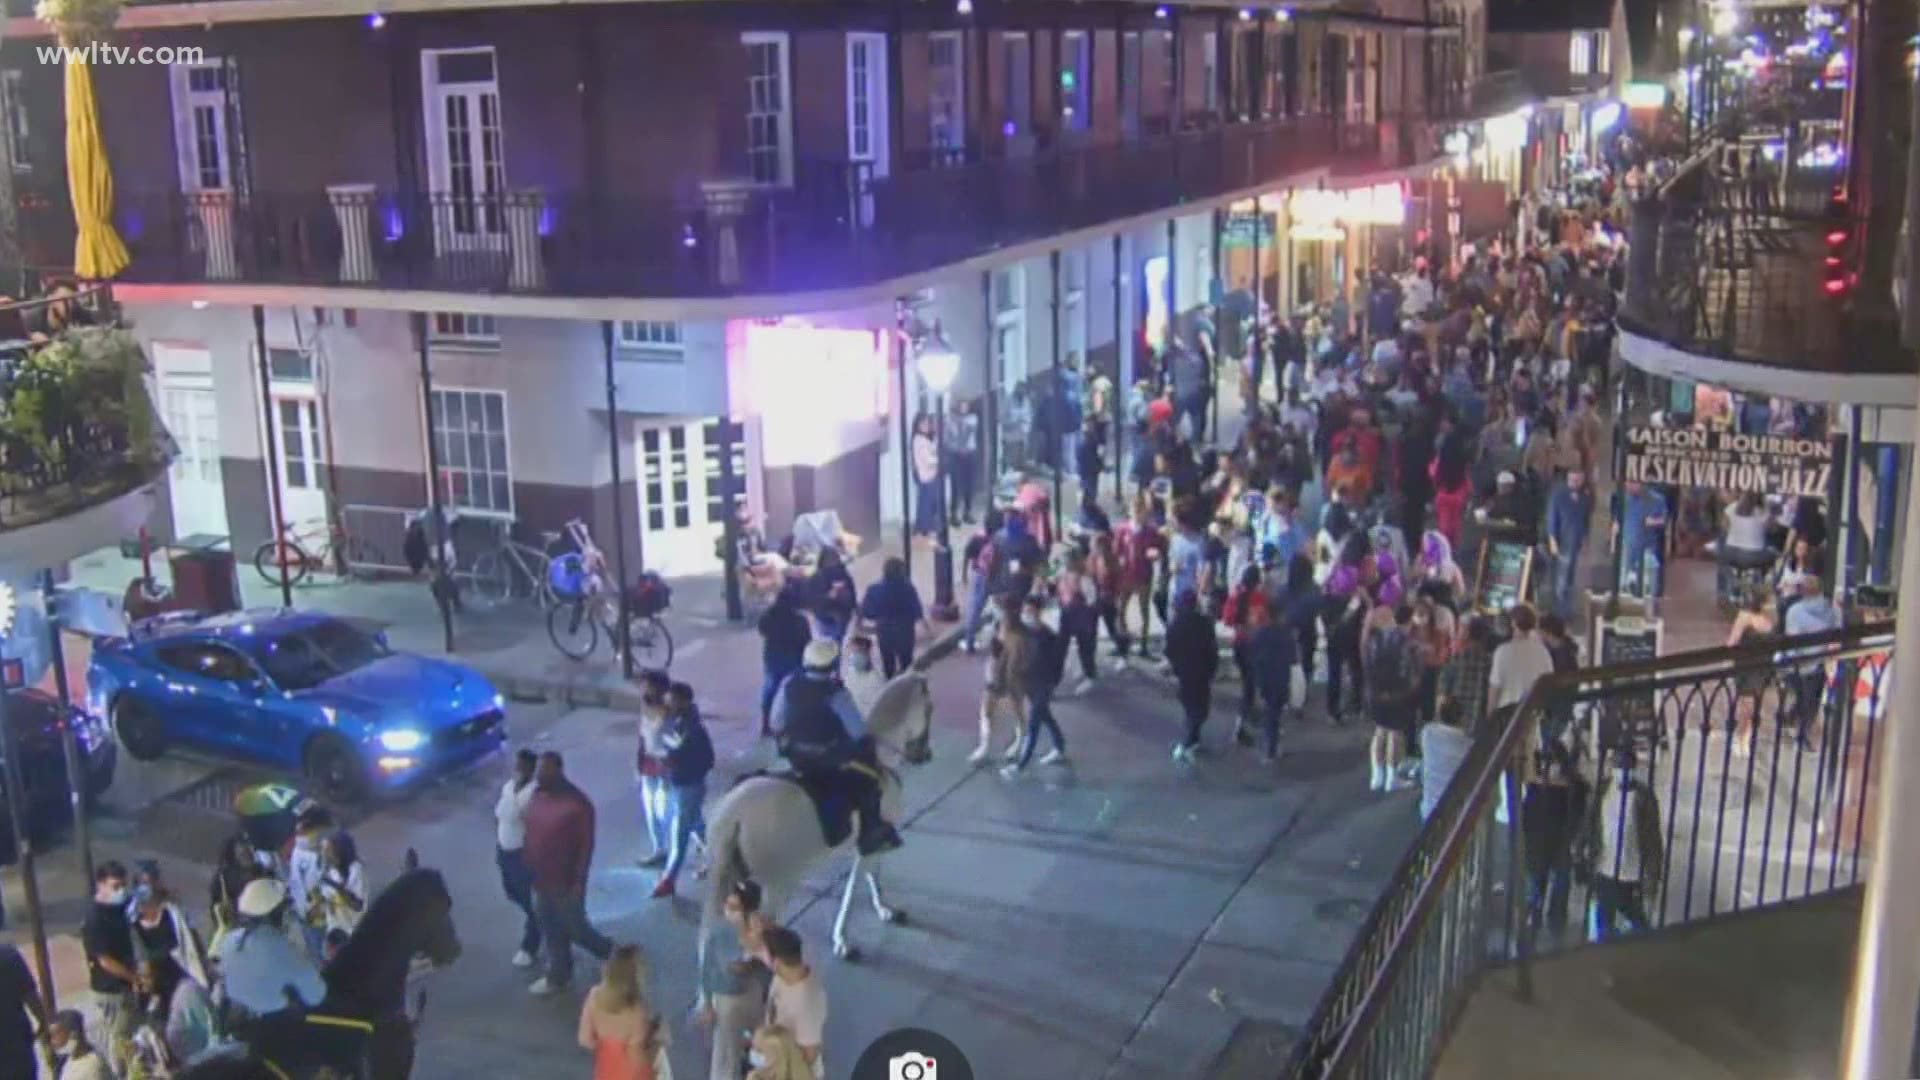 Large crowds greet New Orleans' Phase 3.2